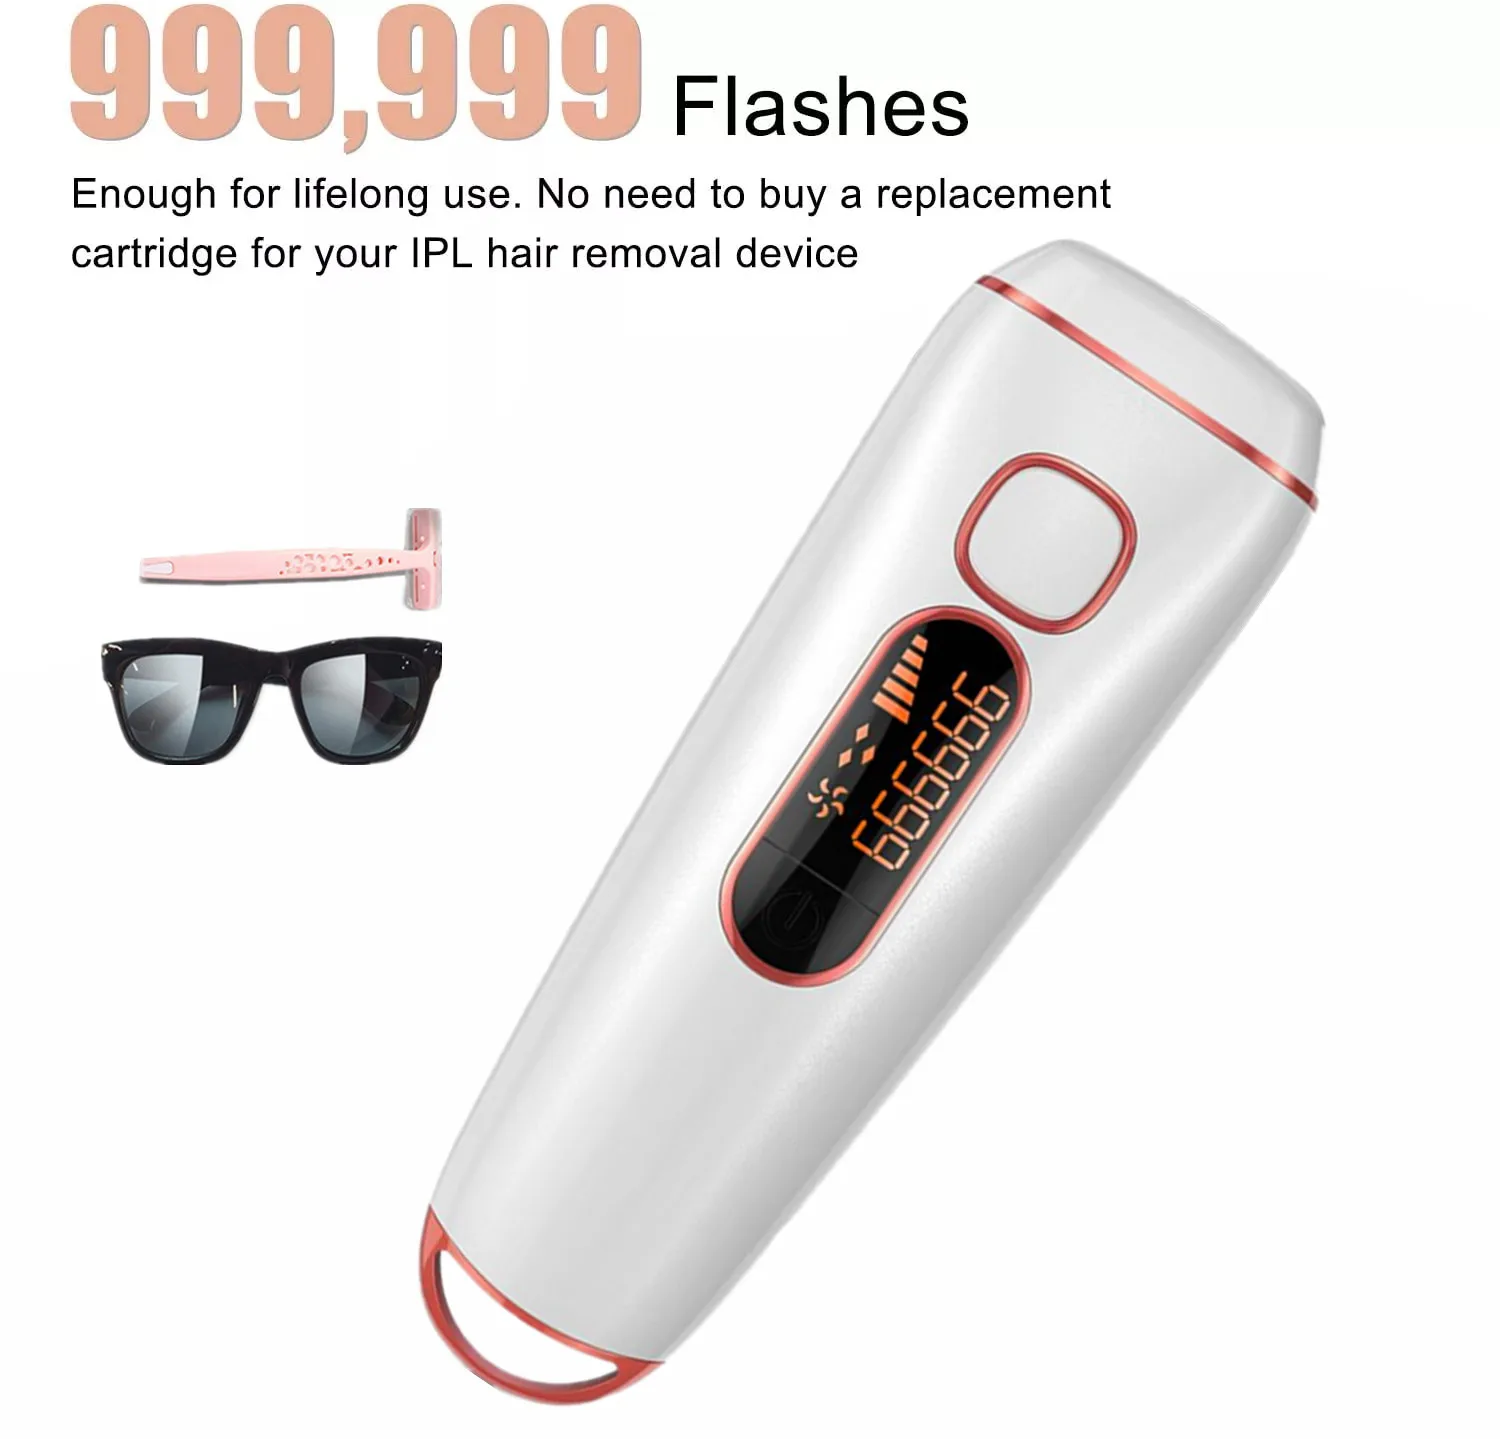 999999 Flash IPL Laser Hair Removal Instrument Painless Electric Epilator Pulsed Light Device 5 gears Adjustable Remover Machine